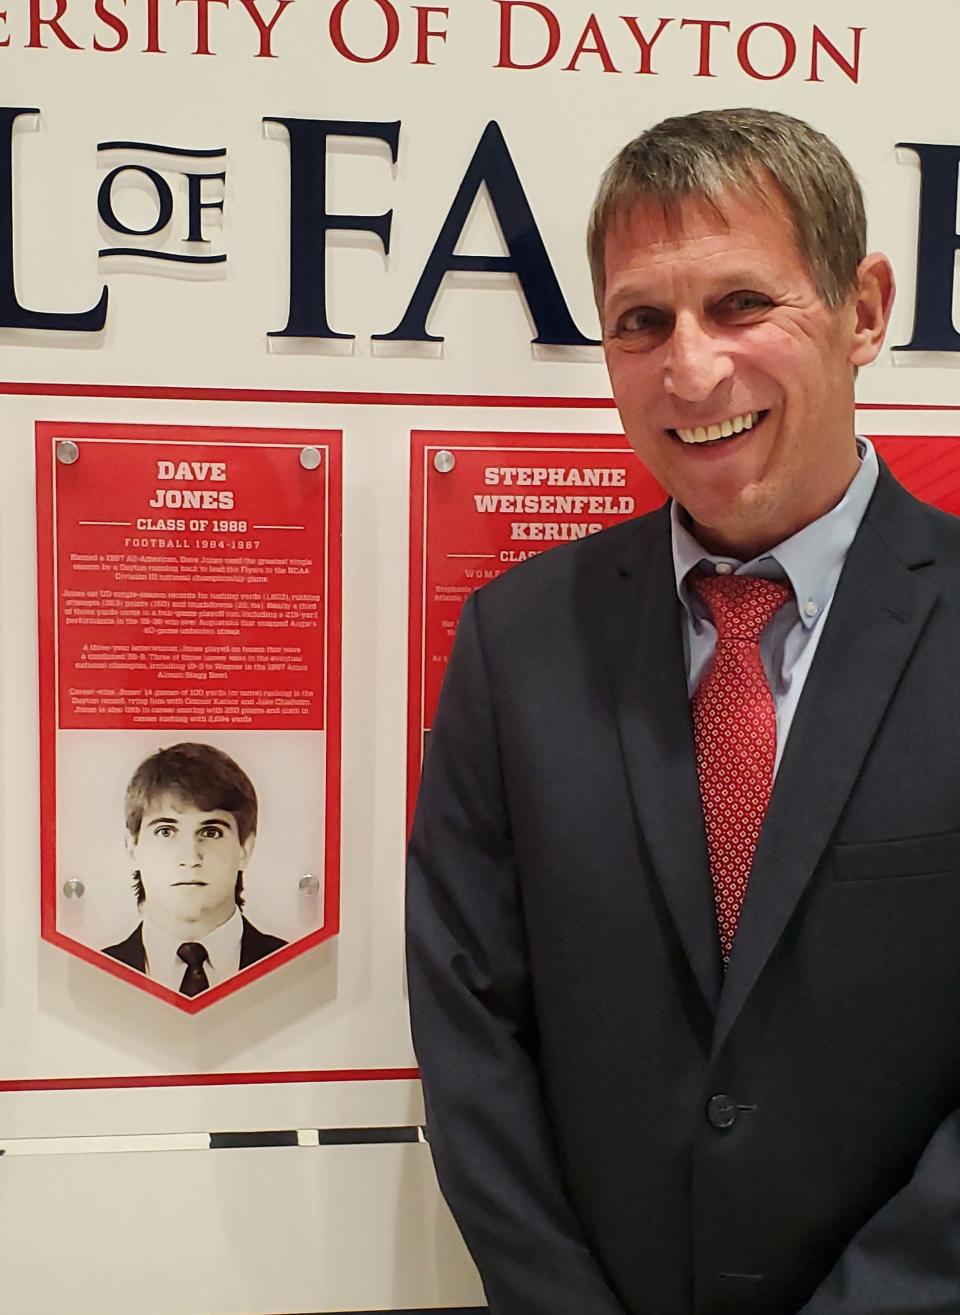 Newark graduate Dave Jones was inducted into the University of Dayton Athletic Hall of Fame last Saturday.